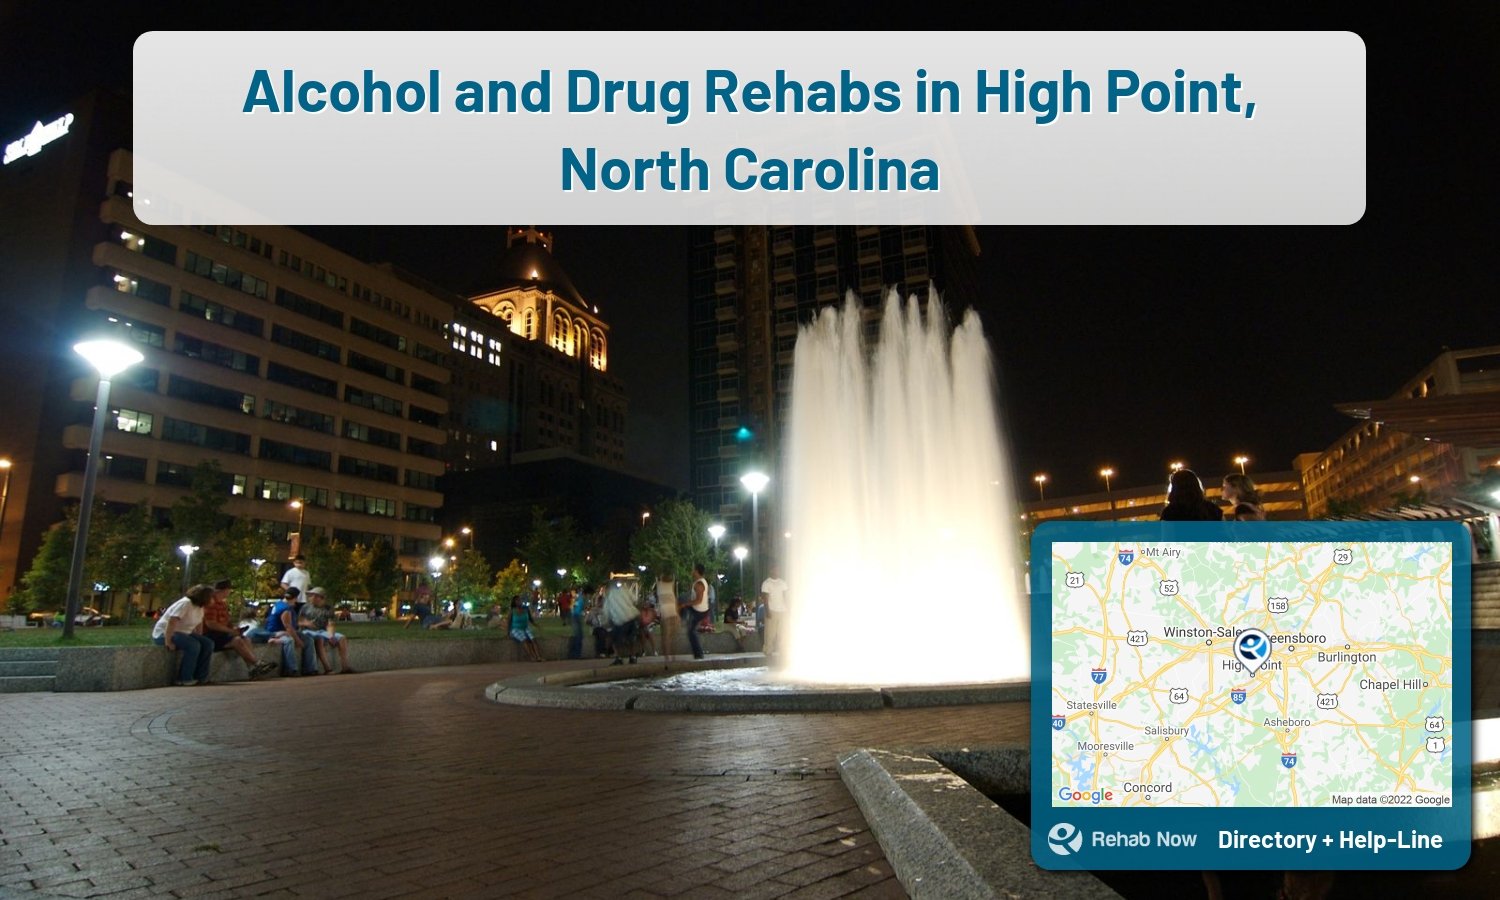 Our experts can help you find treatment now in High Point, North Carolina. We list drug rehab and alcohol centers in North Carolina.